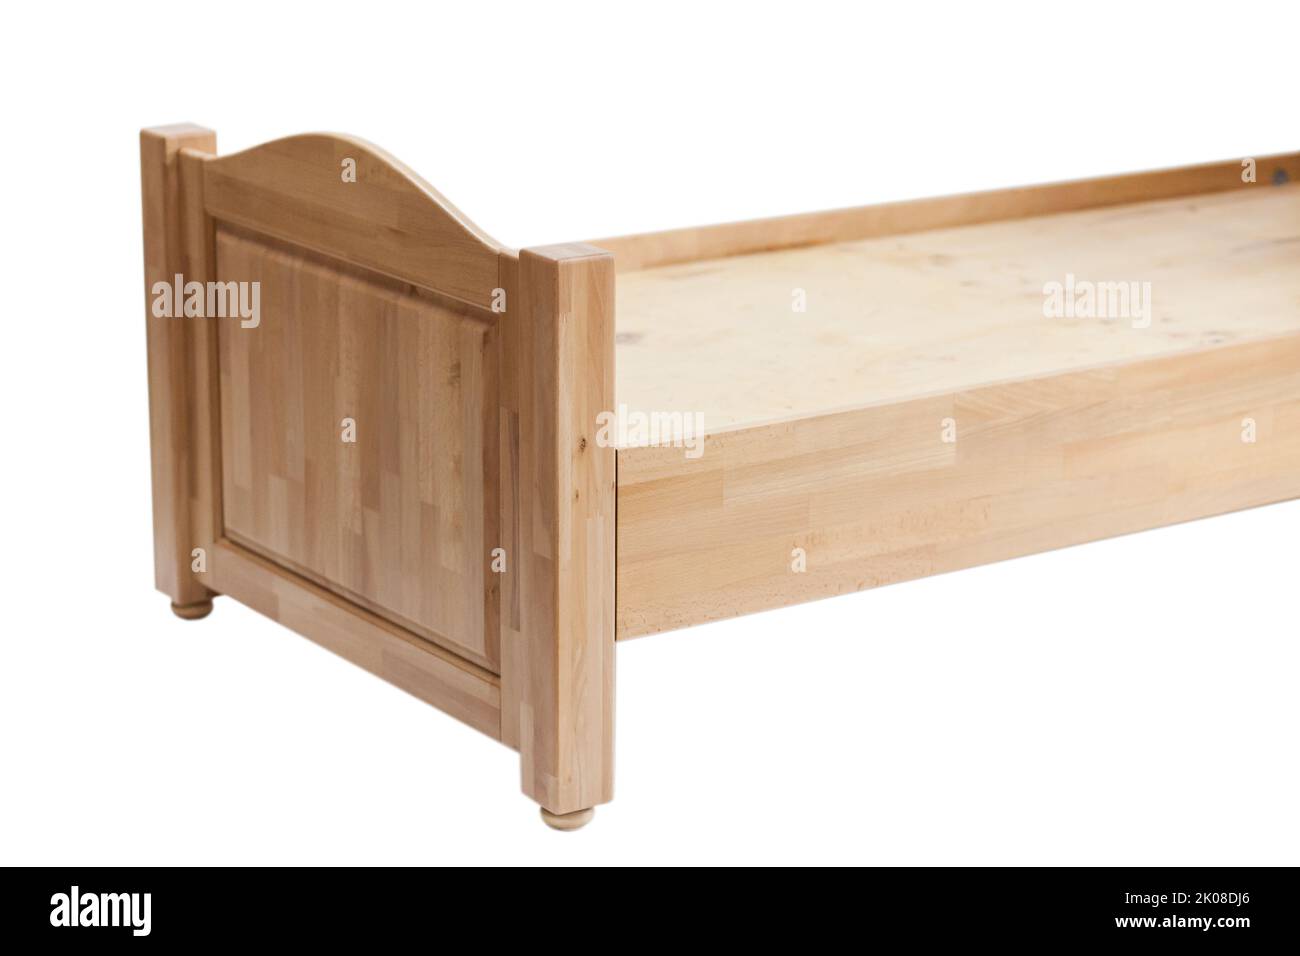 Close-up of a part of a wooden bed for sleeping. Classic sleeping bed furniture made of natural wood. New wooden bed frame on white background view si Stock Photo